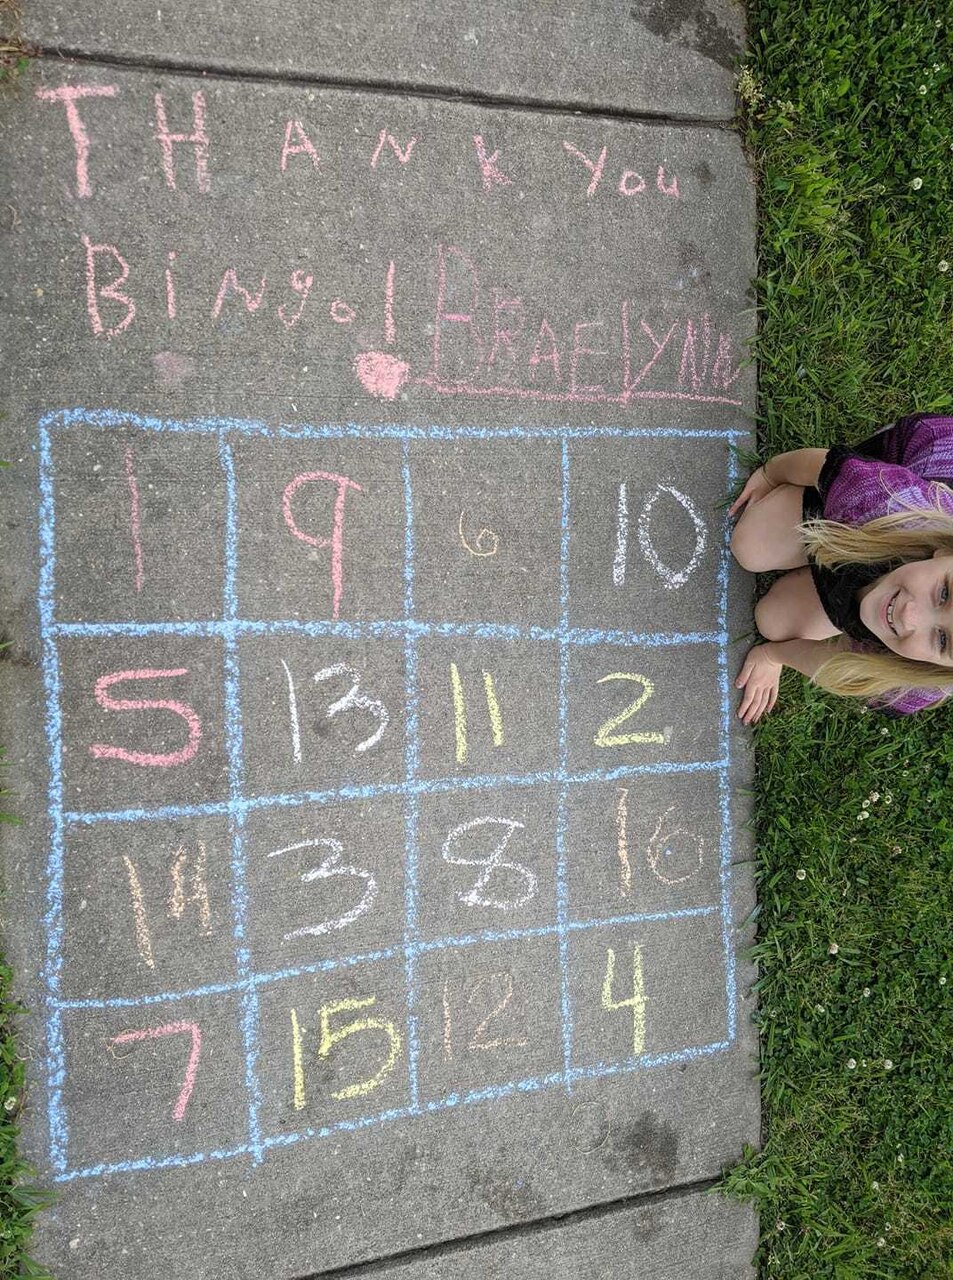 A girl poses with her chalk drawing of a Bingo card with “Thank You Bingo! BraeLynn” inscribed above it.